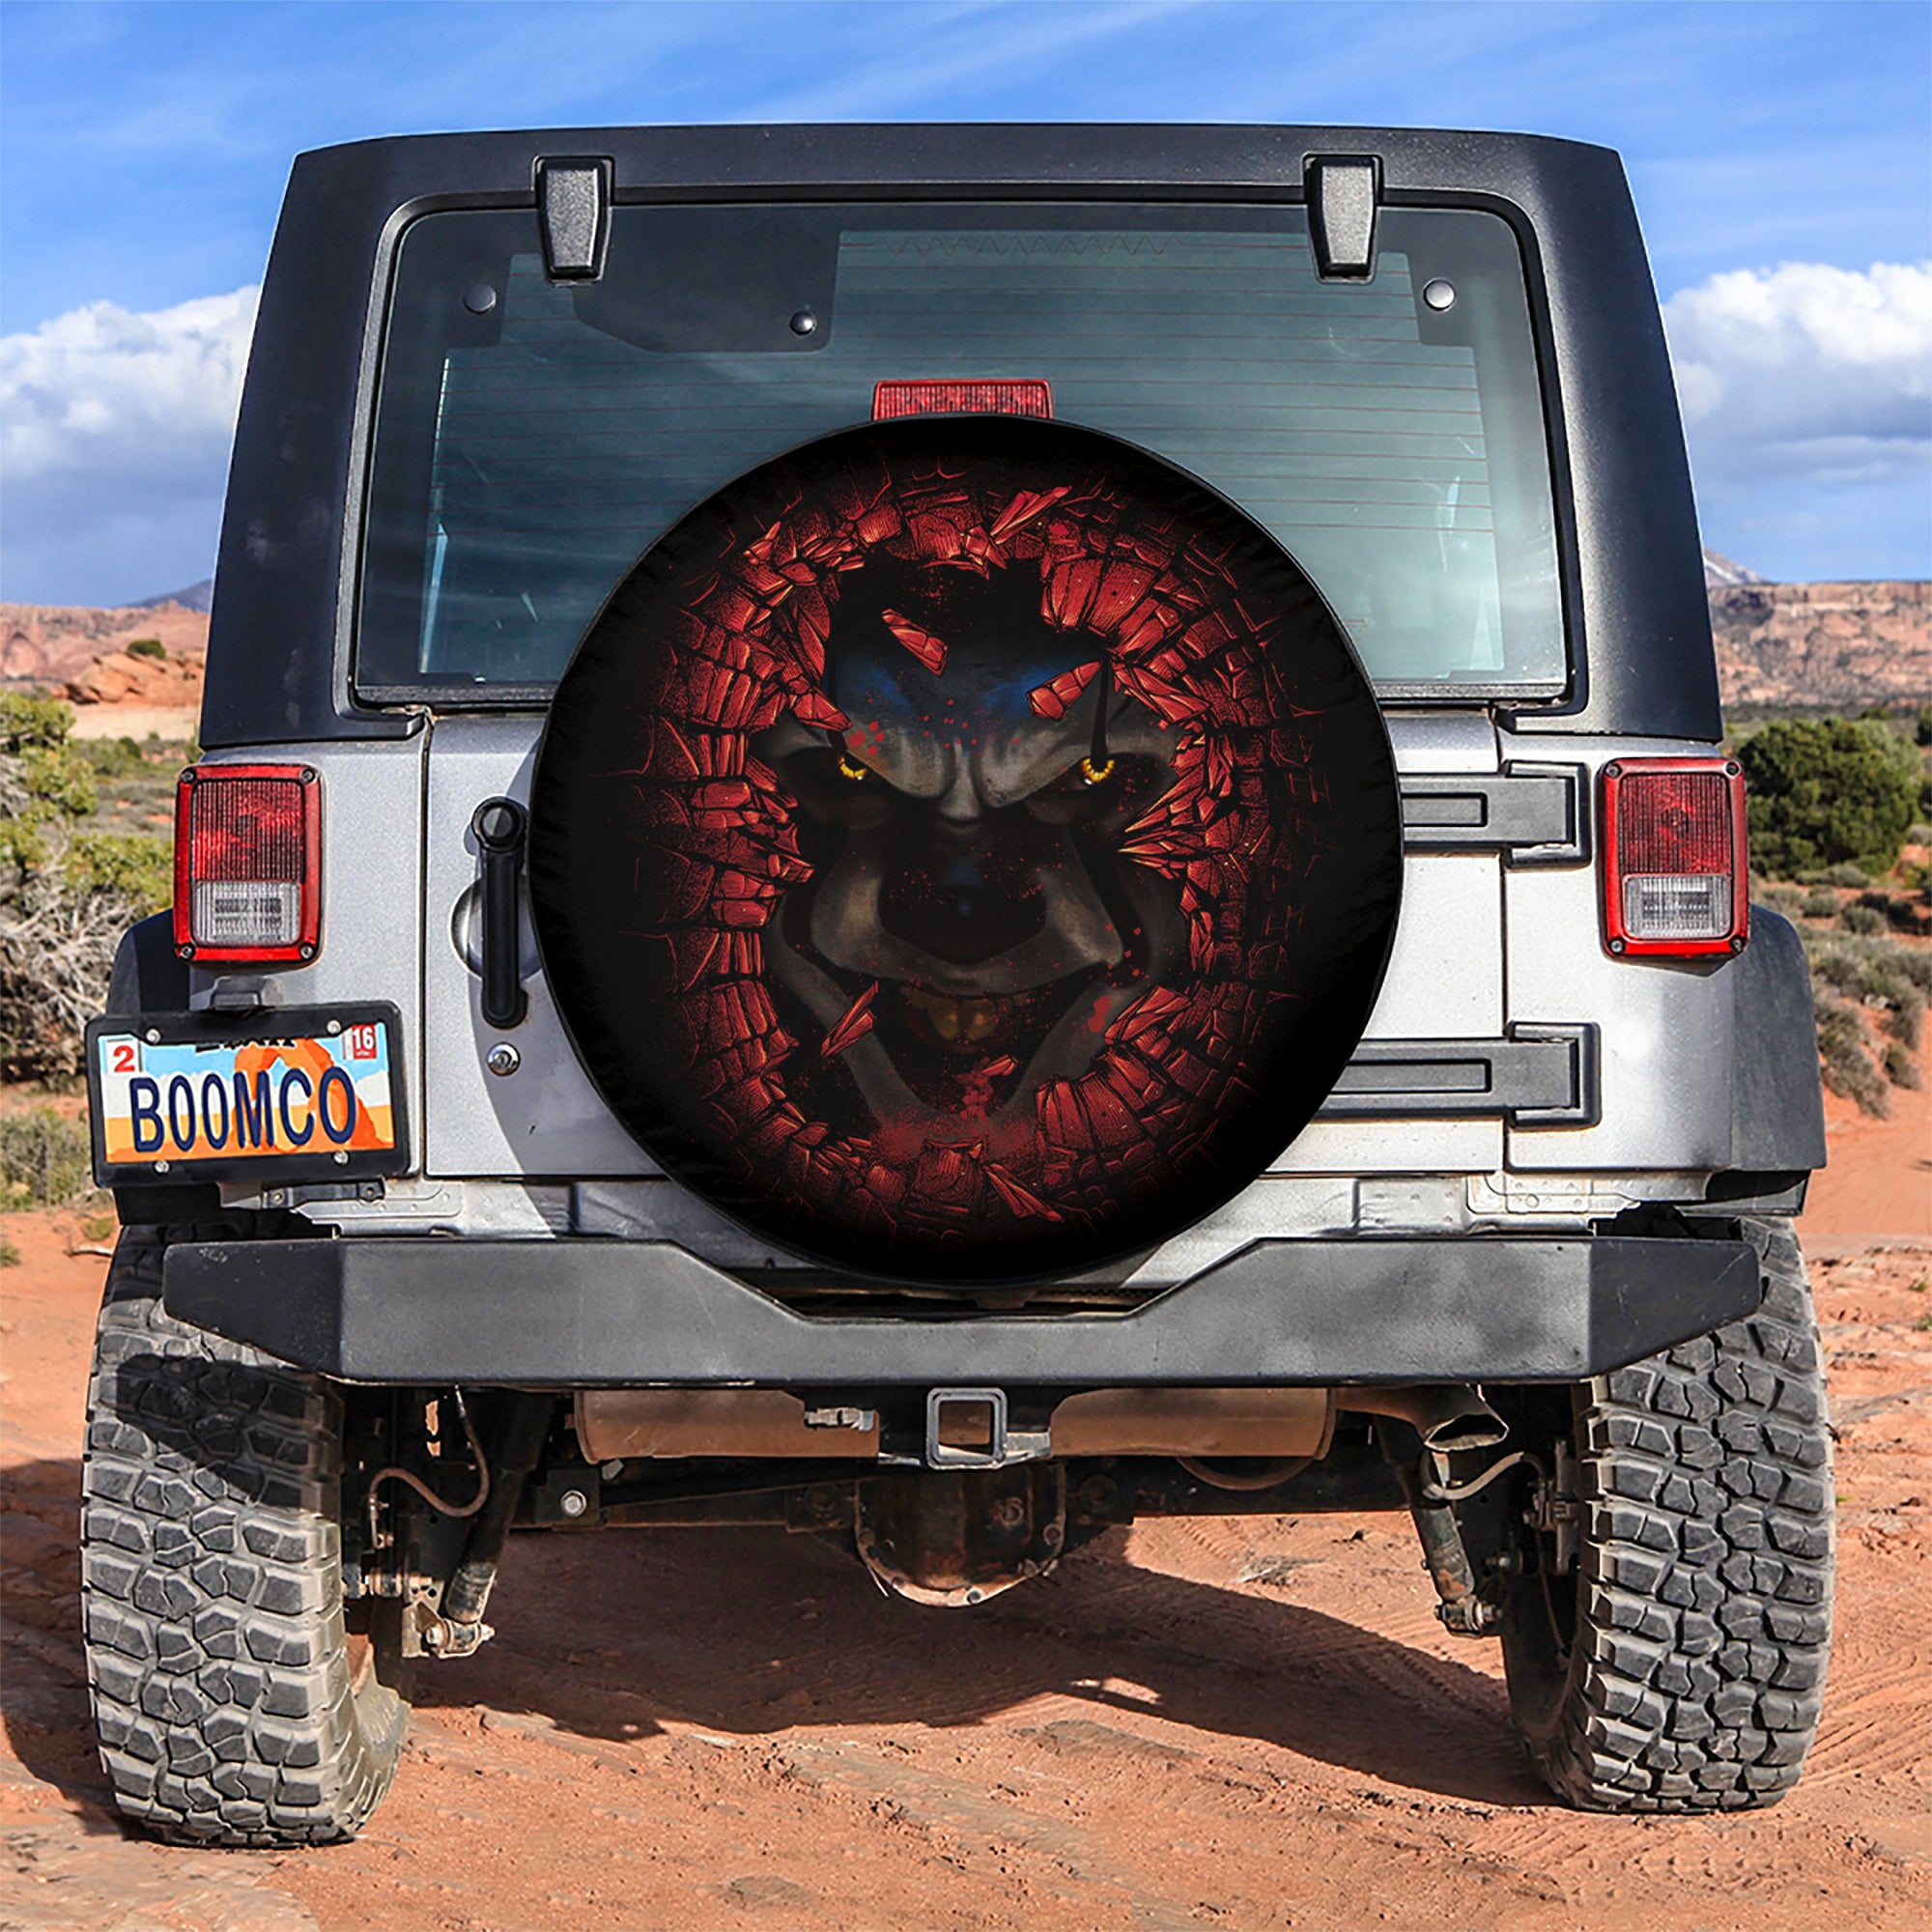 Pennywise IT Horror Break Wall Car Spare Tire Covers Gift For Campers Nearkii